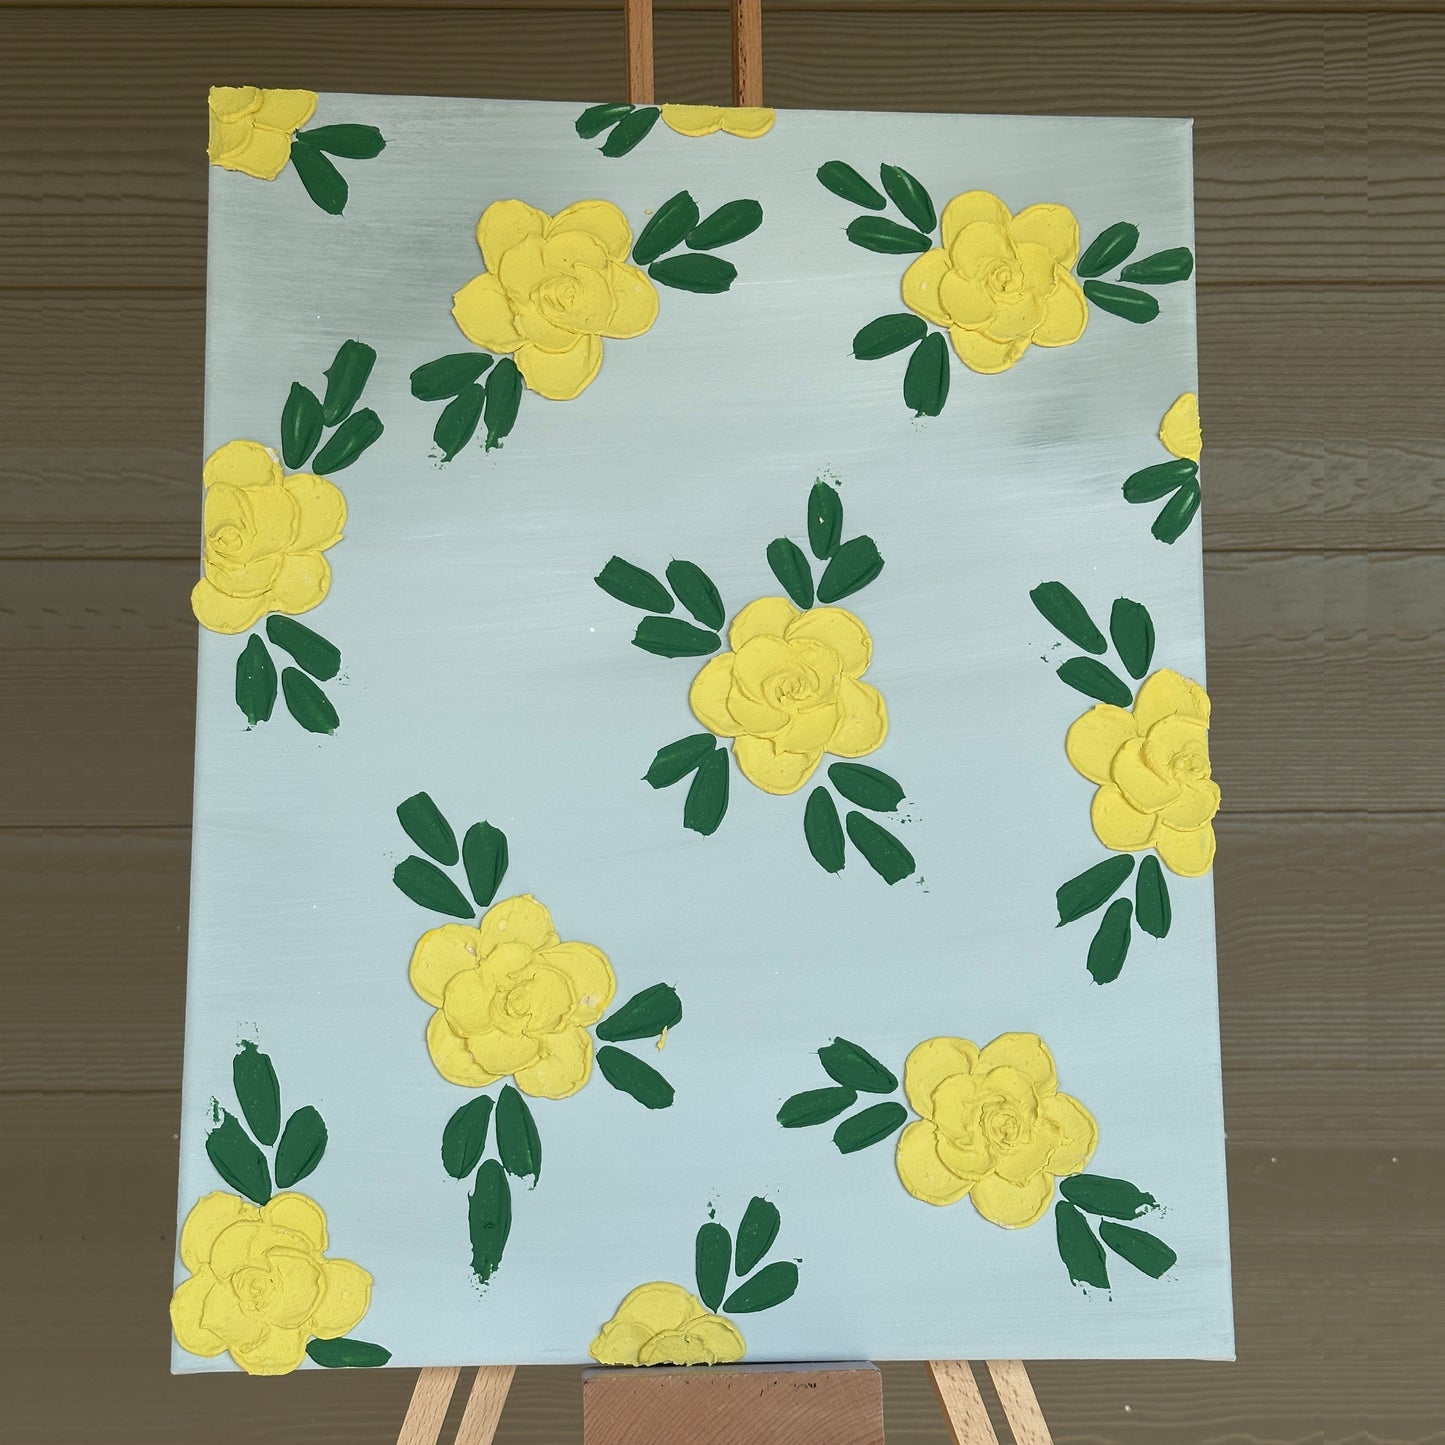 3D Texture Light Yellow Roses on Gray 16"x20"